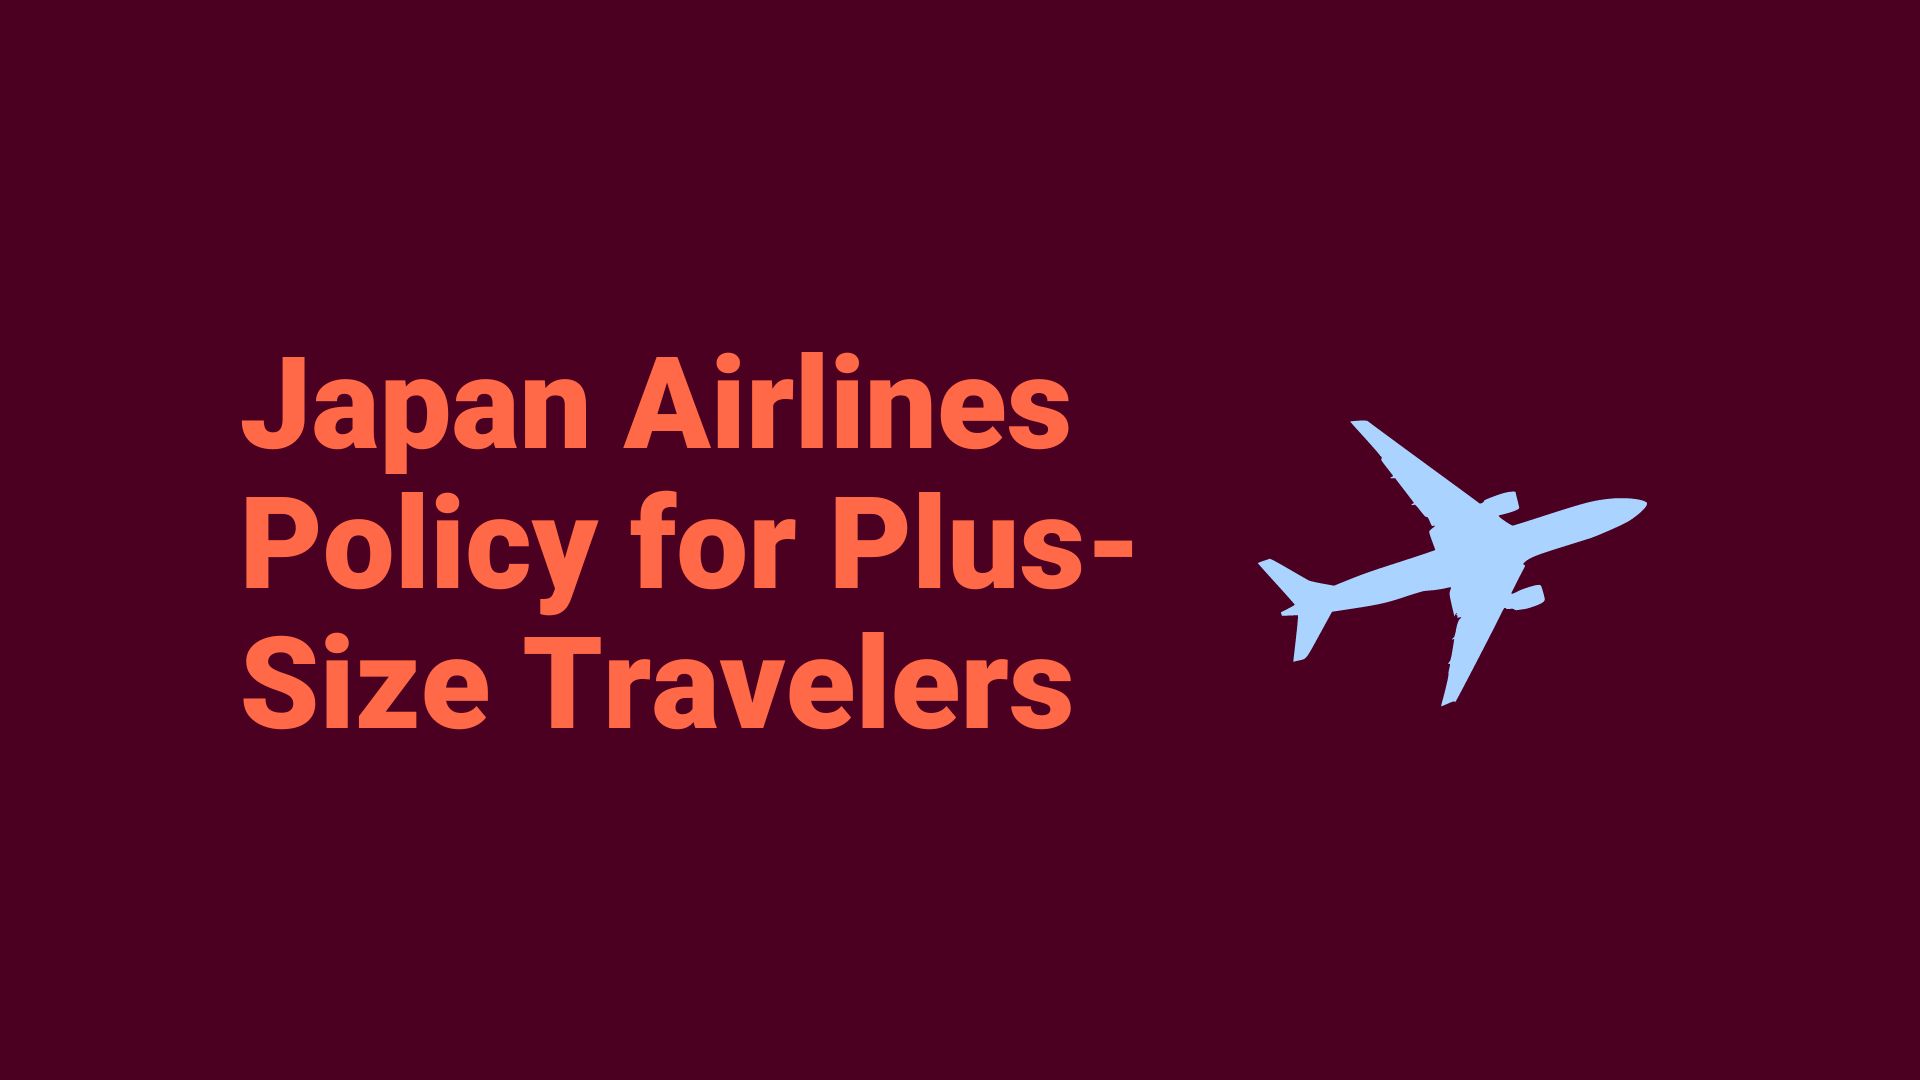 Japan Airlines Policy for Plus-Size Travelers6421342370484.jpg